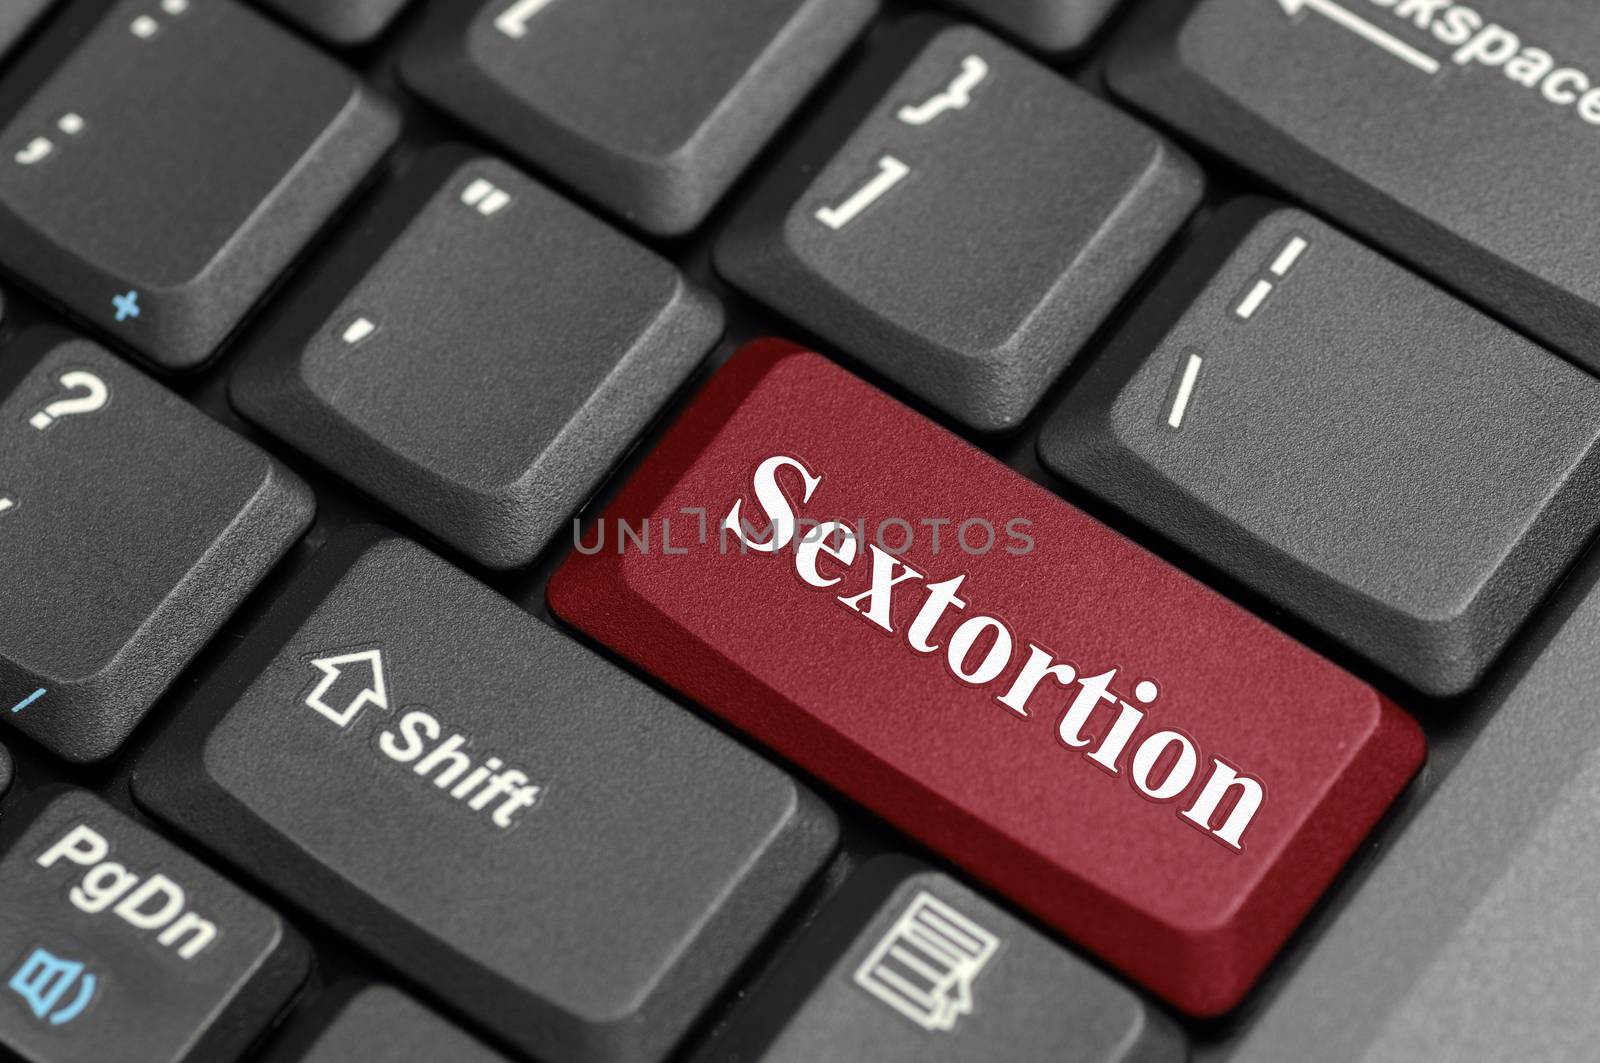 Sextortion key on keyboard by payphoto